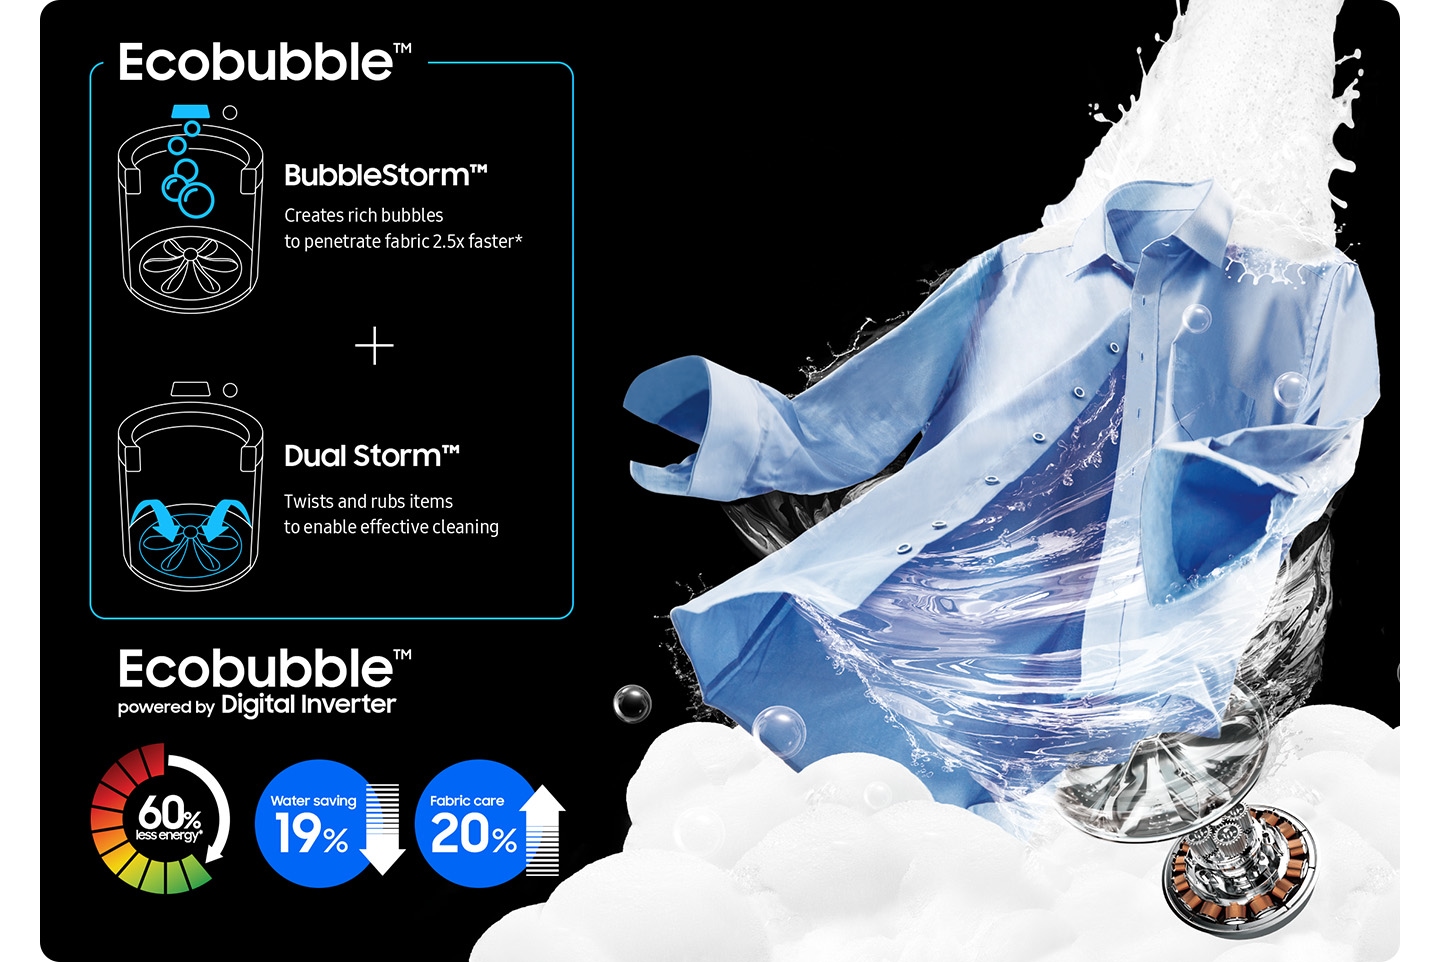 A strong stream of water, foam, and a Digital Inverter Technology motor are washing a blue shirt. Bubblestorm™ creates rich bubbles to penetrate fabric 2.5x faster* and Dual Storm™ twists and rubs items to enable effective cleaning. Ecobubble™ powered by Digital Inverter, saves 60% of energy, 19% of water and cares better 20% of fabric.